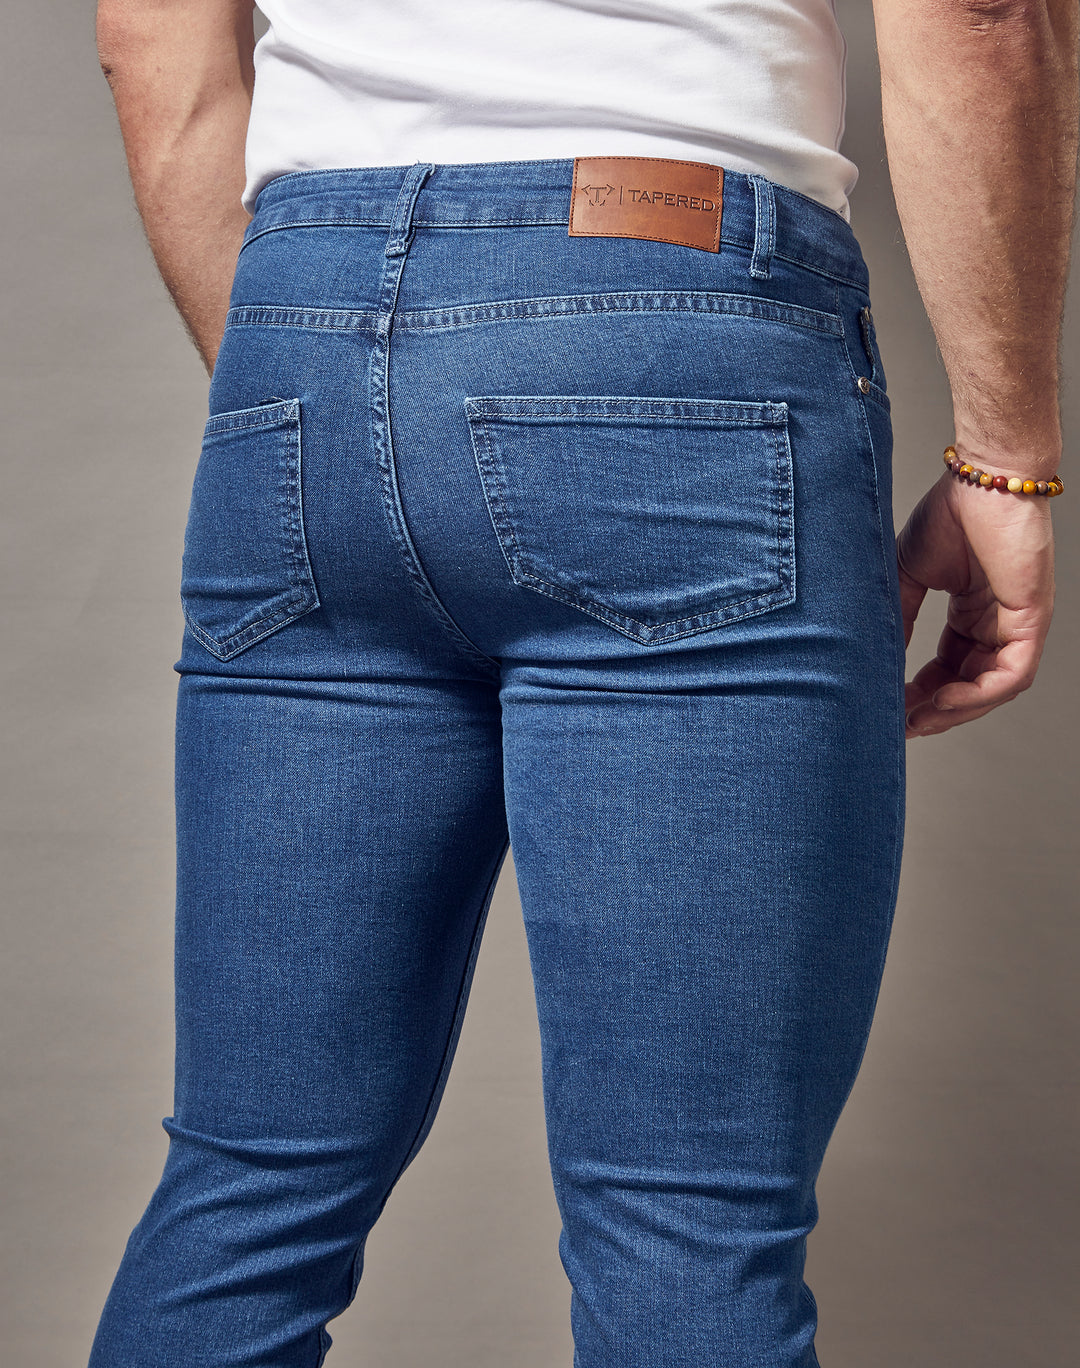 Mid-wash blue jeans with a muscle fit from Tapered Menswear, featuring a tapered design and exceptional quality.